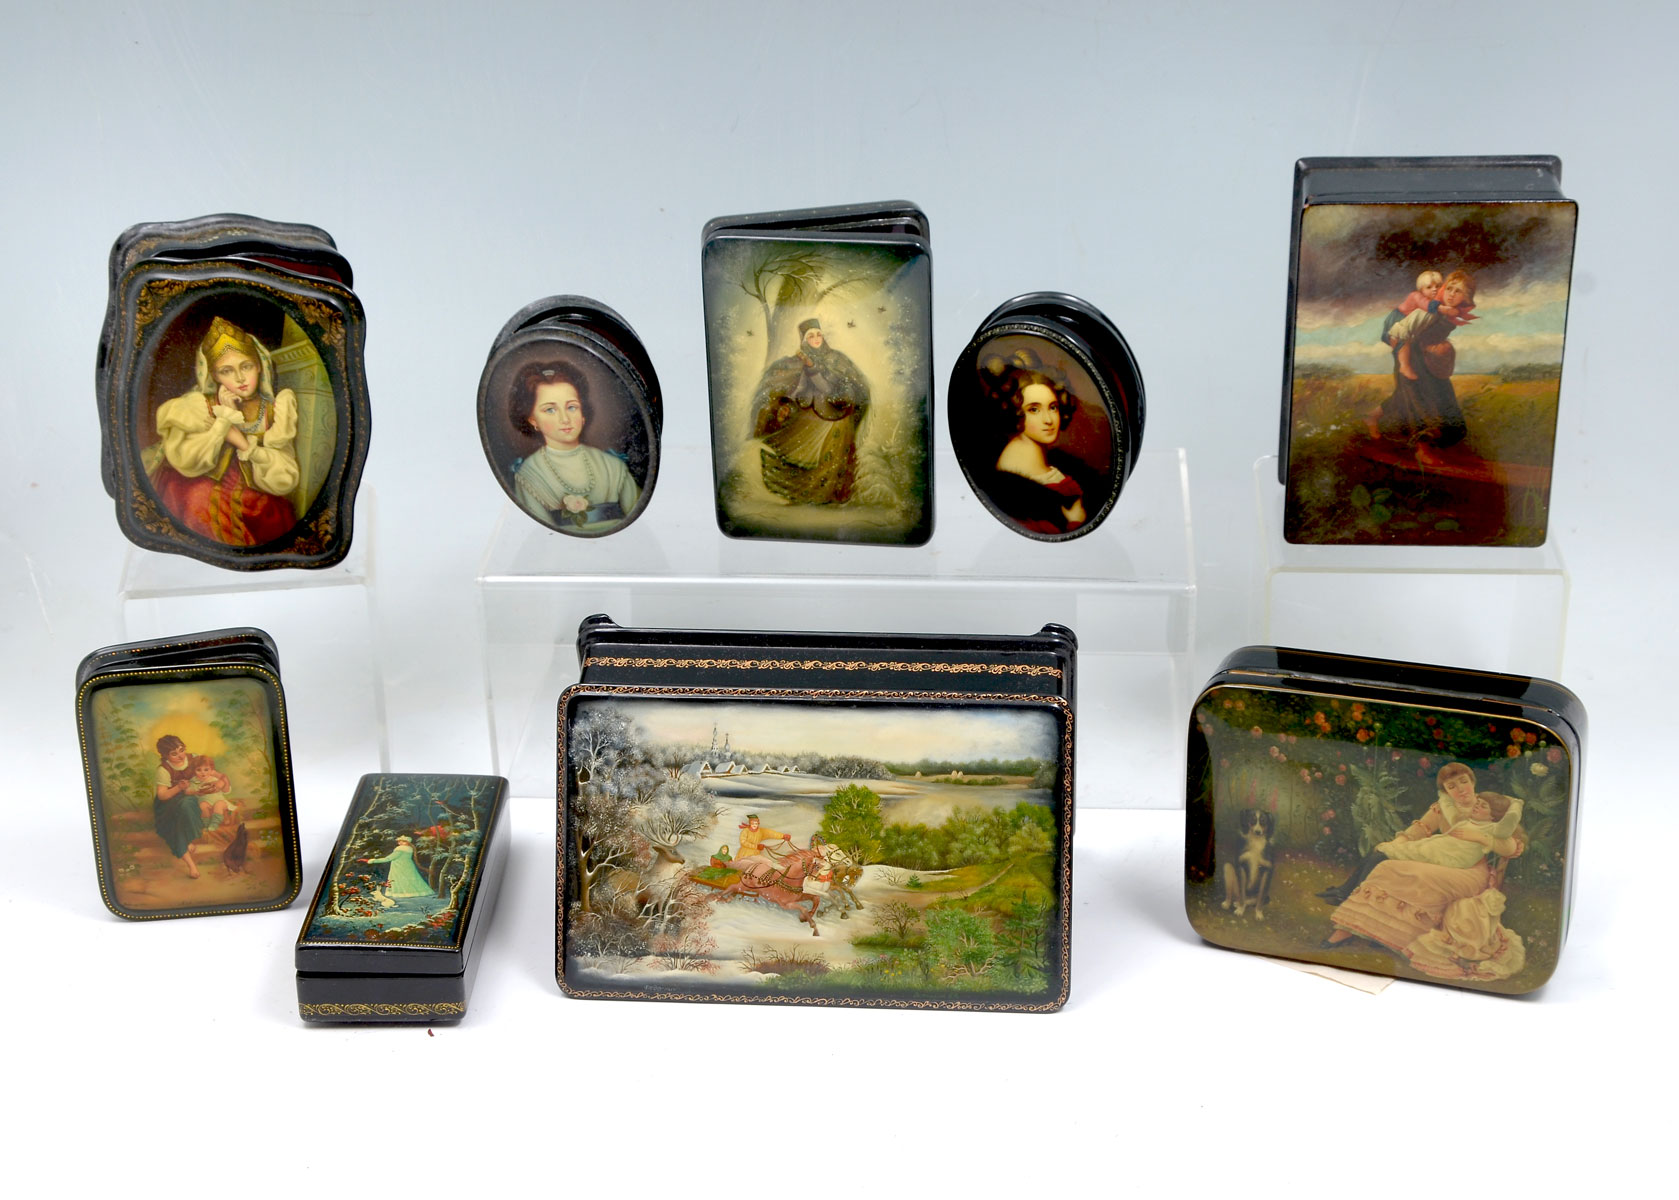 9 PAINTED RUSSIAN LACQUERED BOXES: